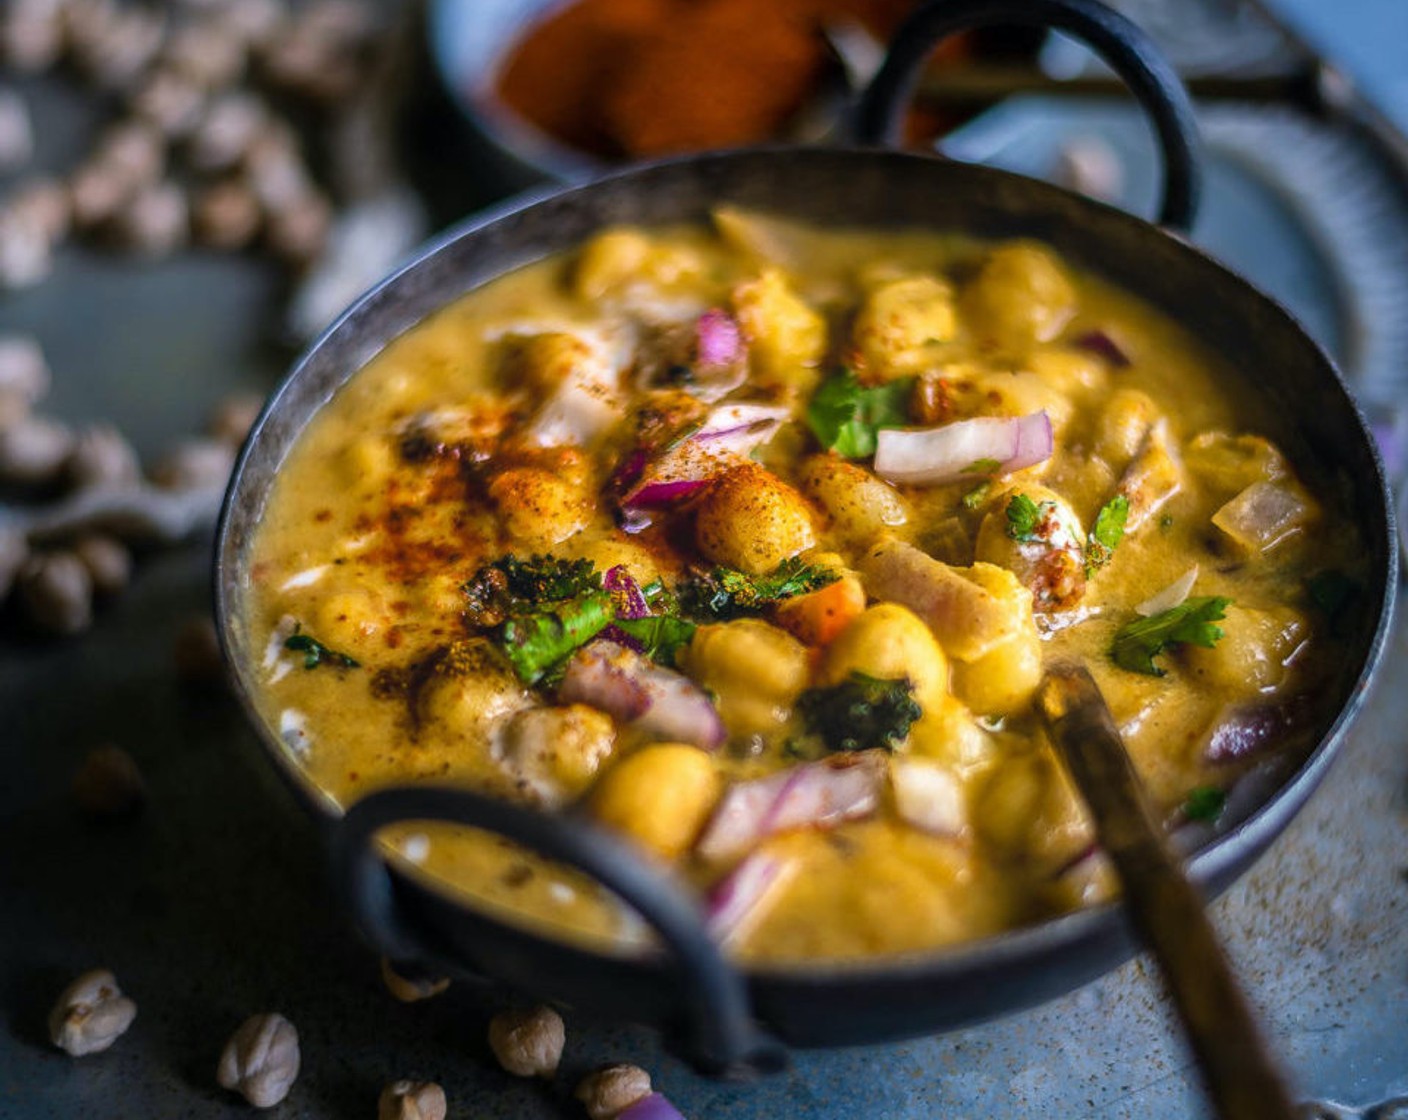 step 9 Instant Pot Vegan Potato recipe with chickpeas is now ready! Serve it warm with some steamed rice or any Indian flatbread like roti, naan, or chapati.